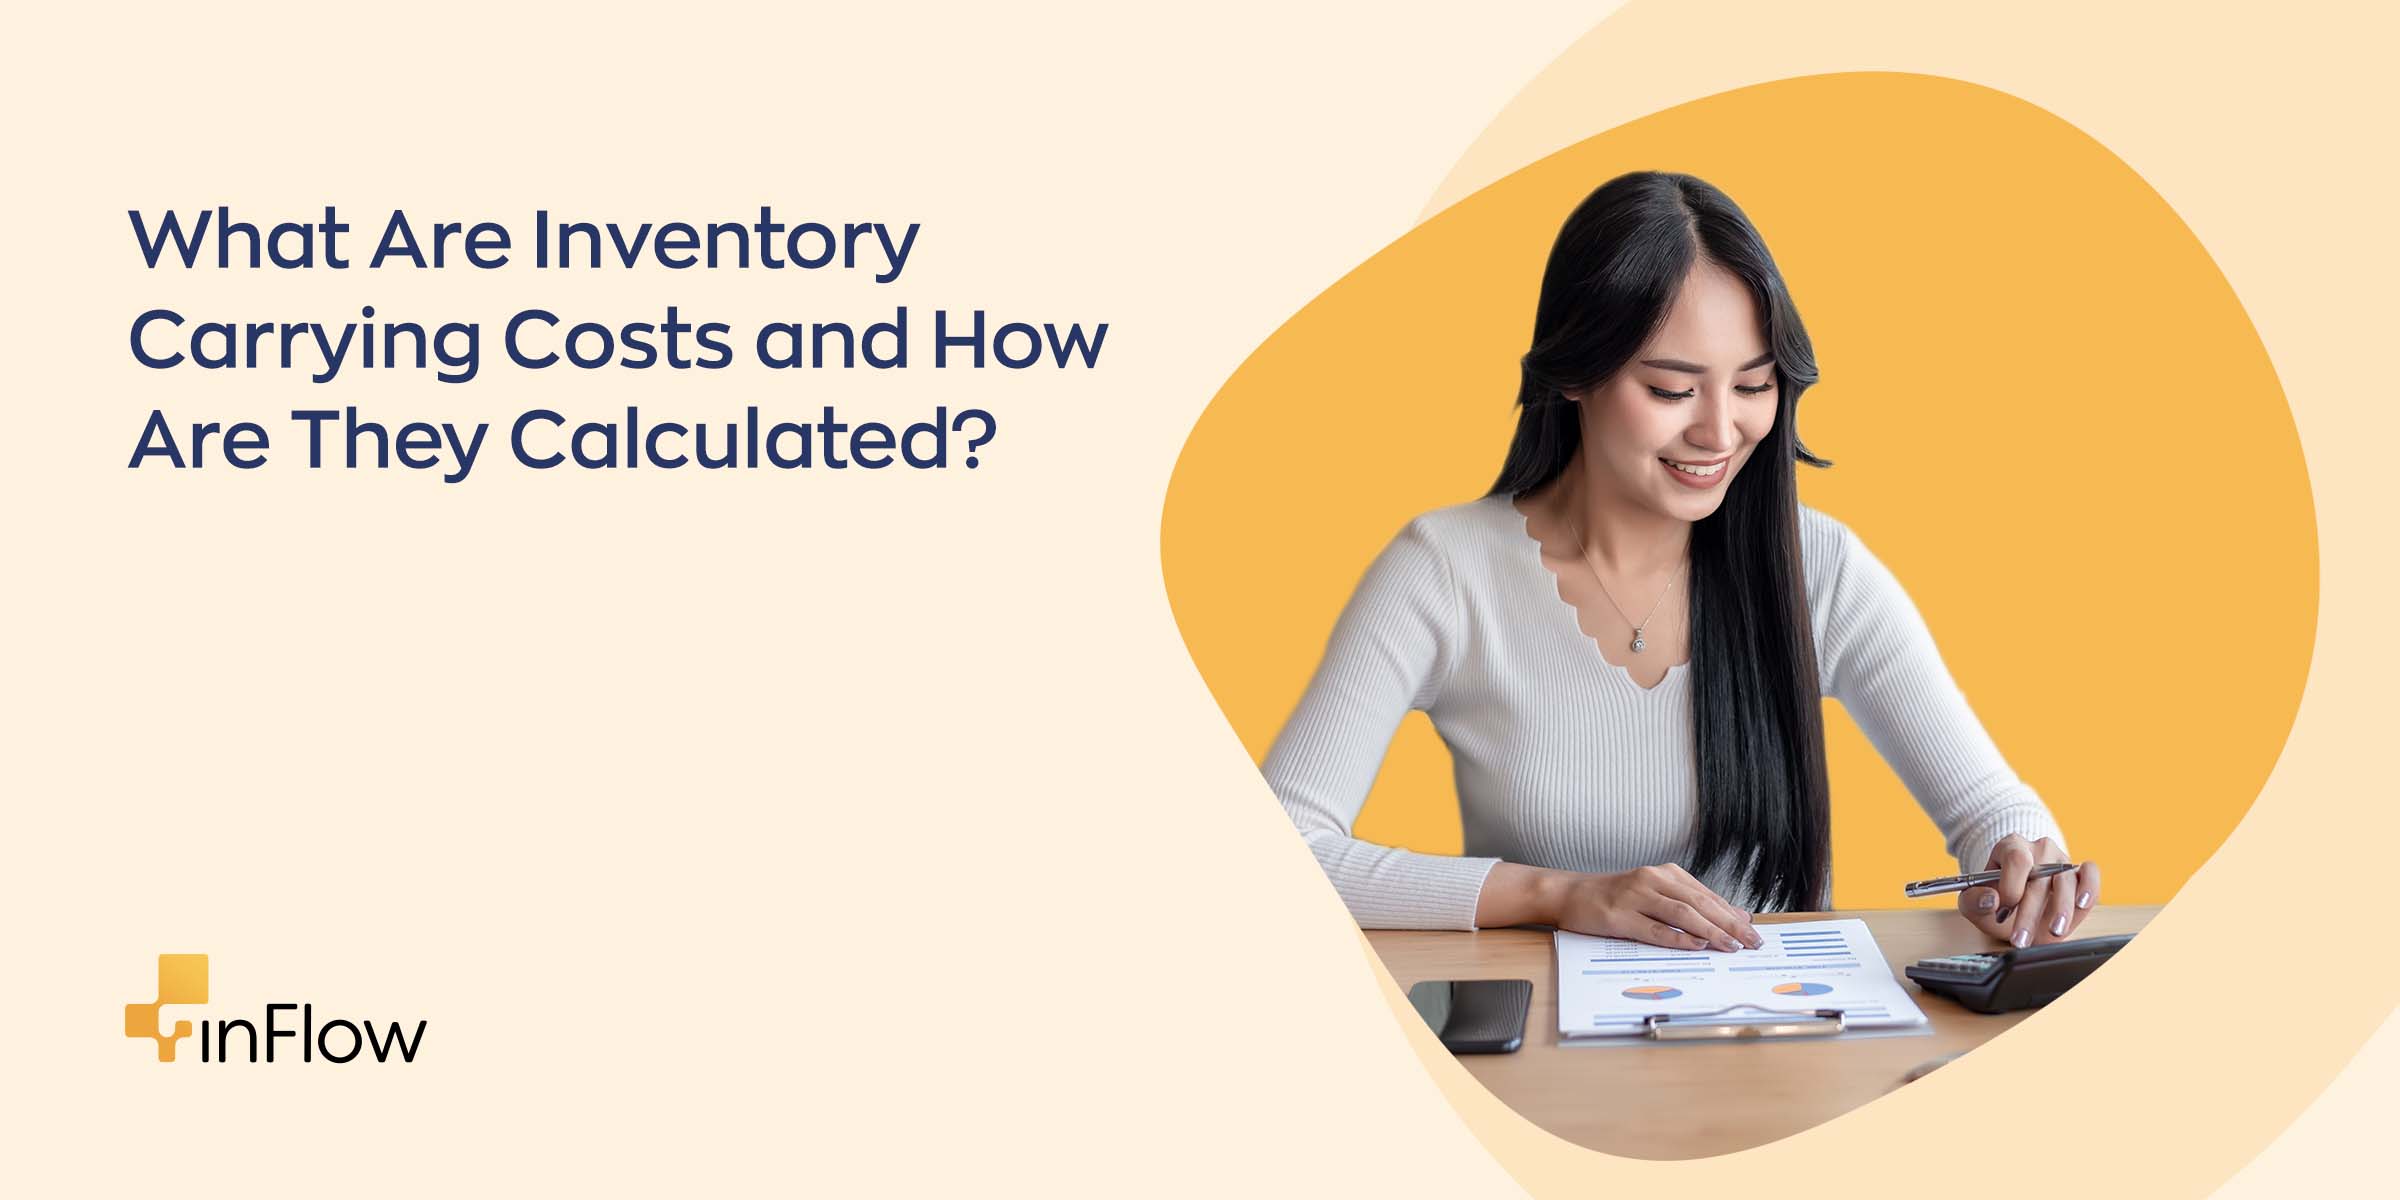 What Are Inventory Carrying Costs and How Are They Calculated?